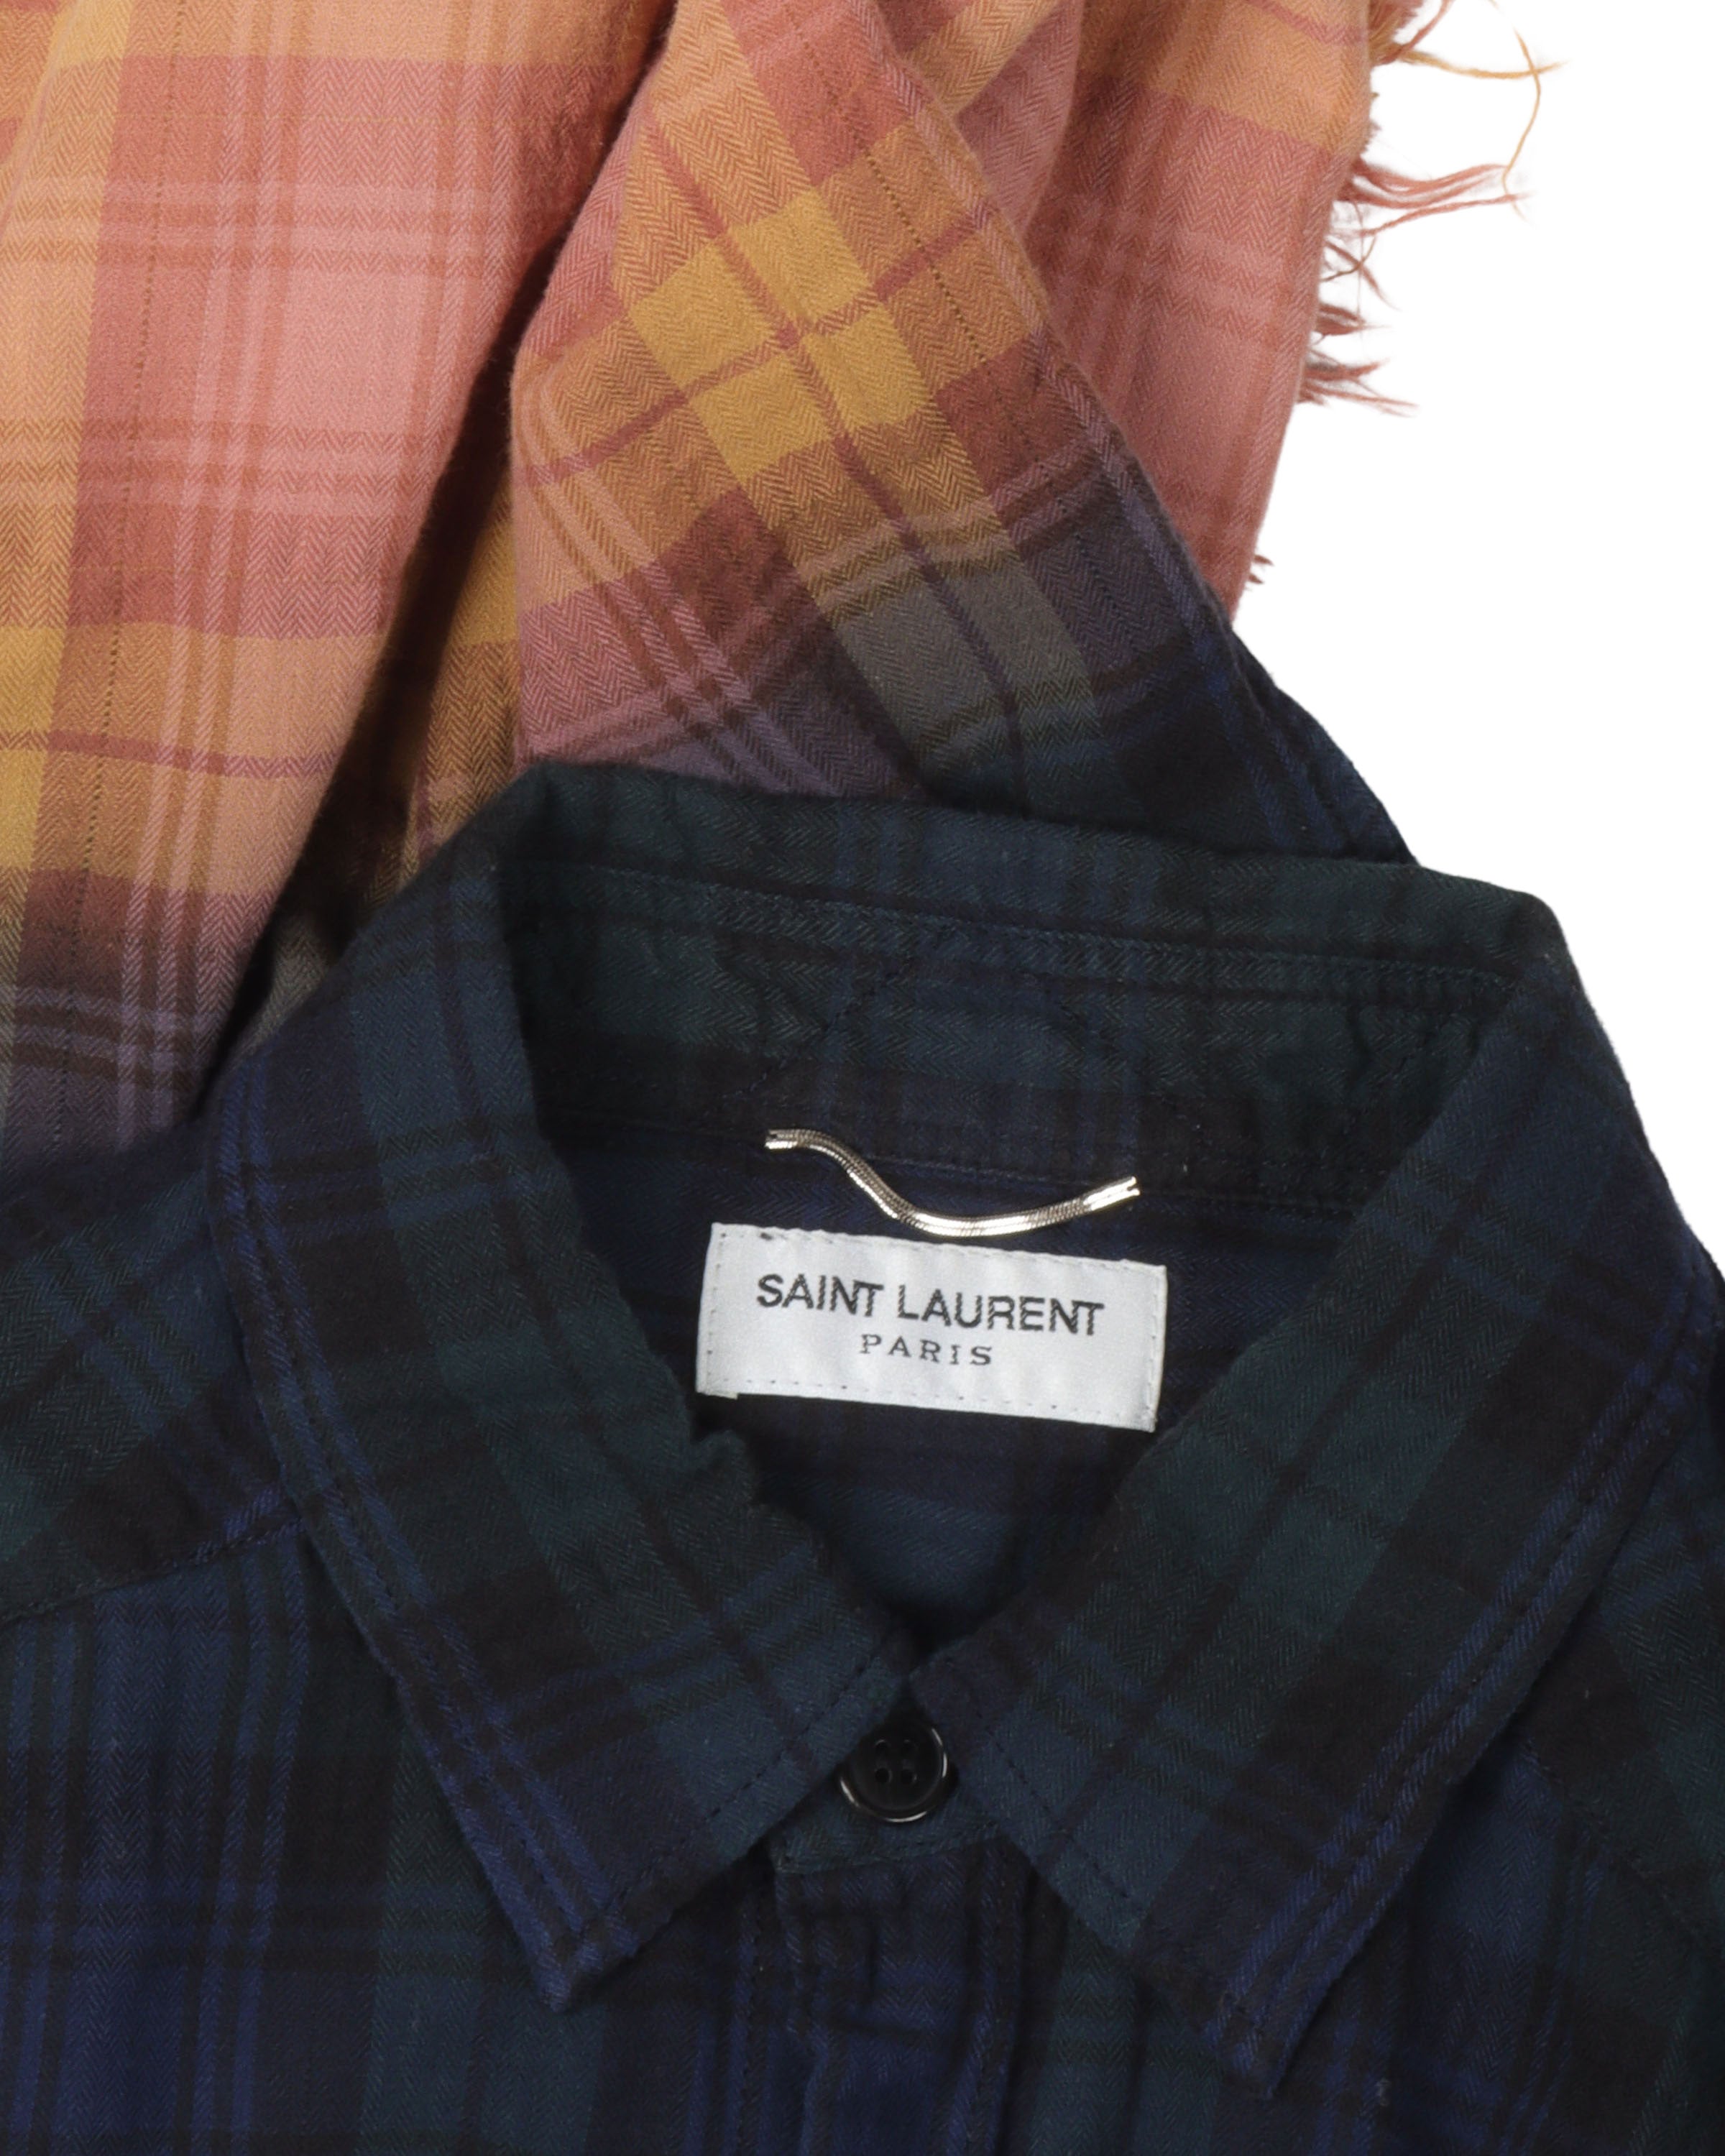 SS16 Surf Sound Ombre Flannel